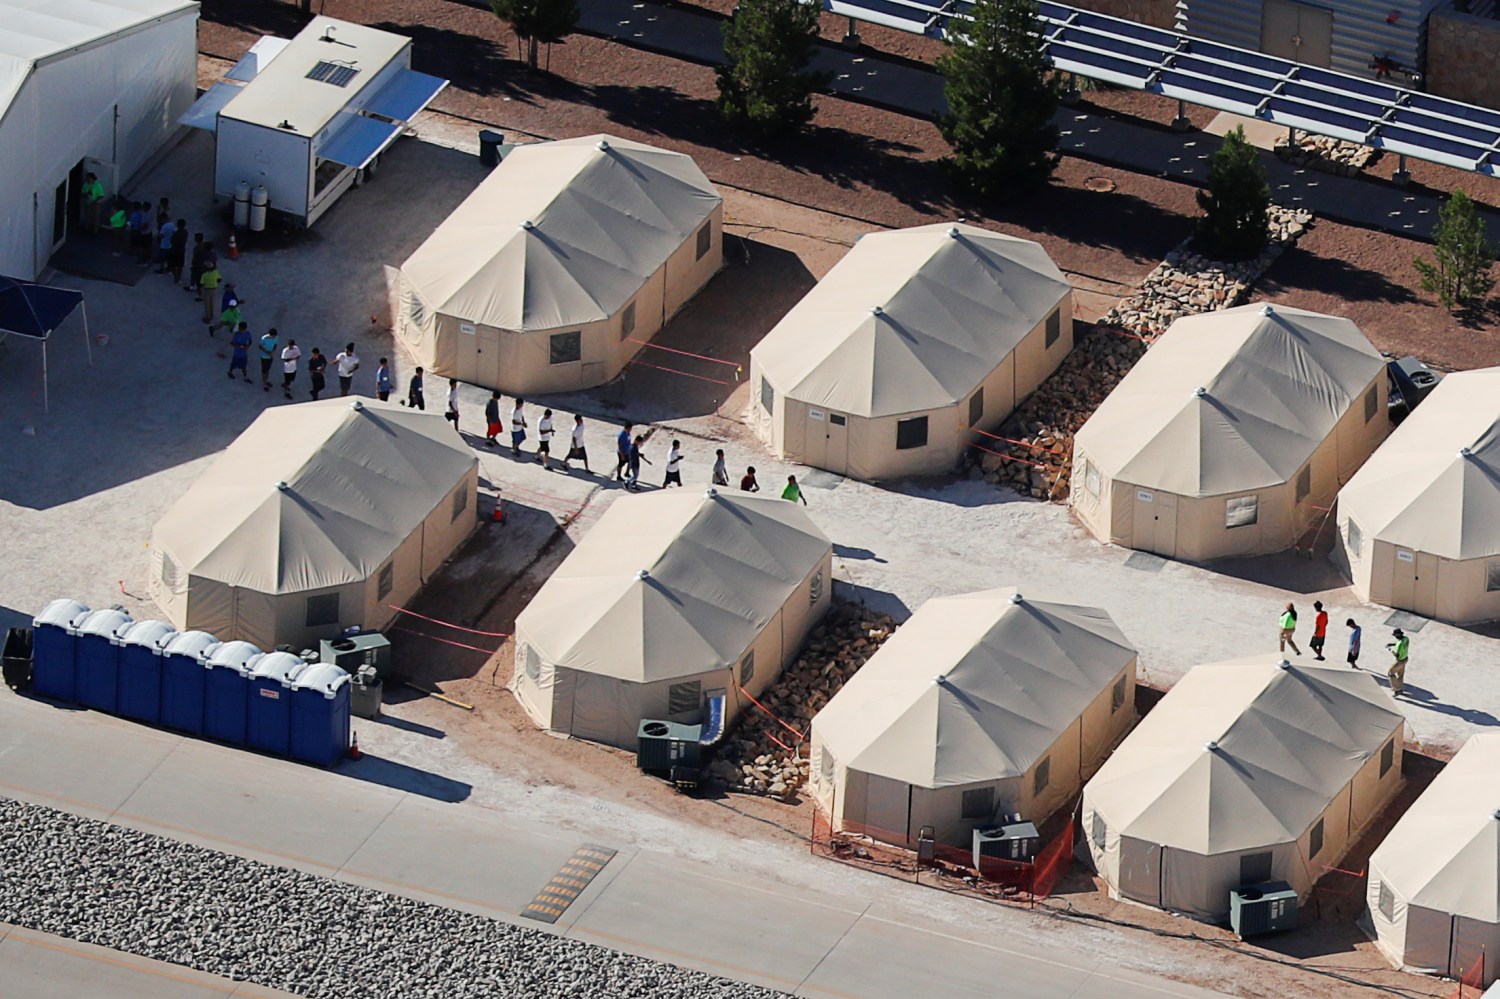 Immigrant children, many of whom have been separated from their parents under a new "zero tolerance" policy by the Trump administration, are shown walking in single file between tents in their compound next to the Mexican border in Tornillo, Texas, U.S. June 18, 2018.        REUTERS/Mike Blake - RC1A59D1E150